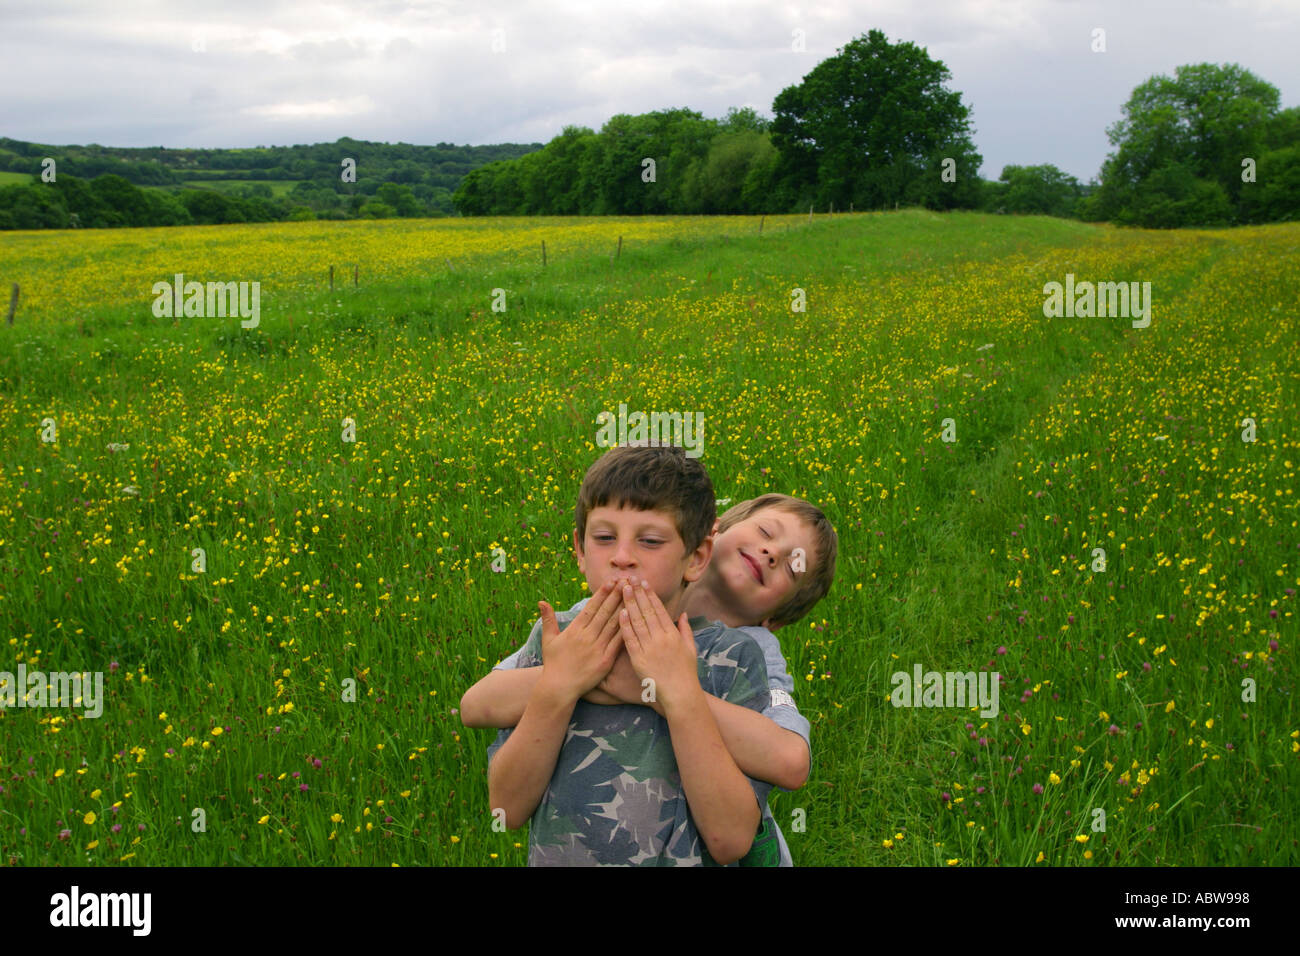 Boys playing in a field in Dorset, UK. Stock Photo